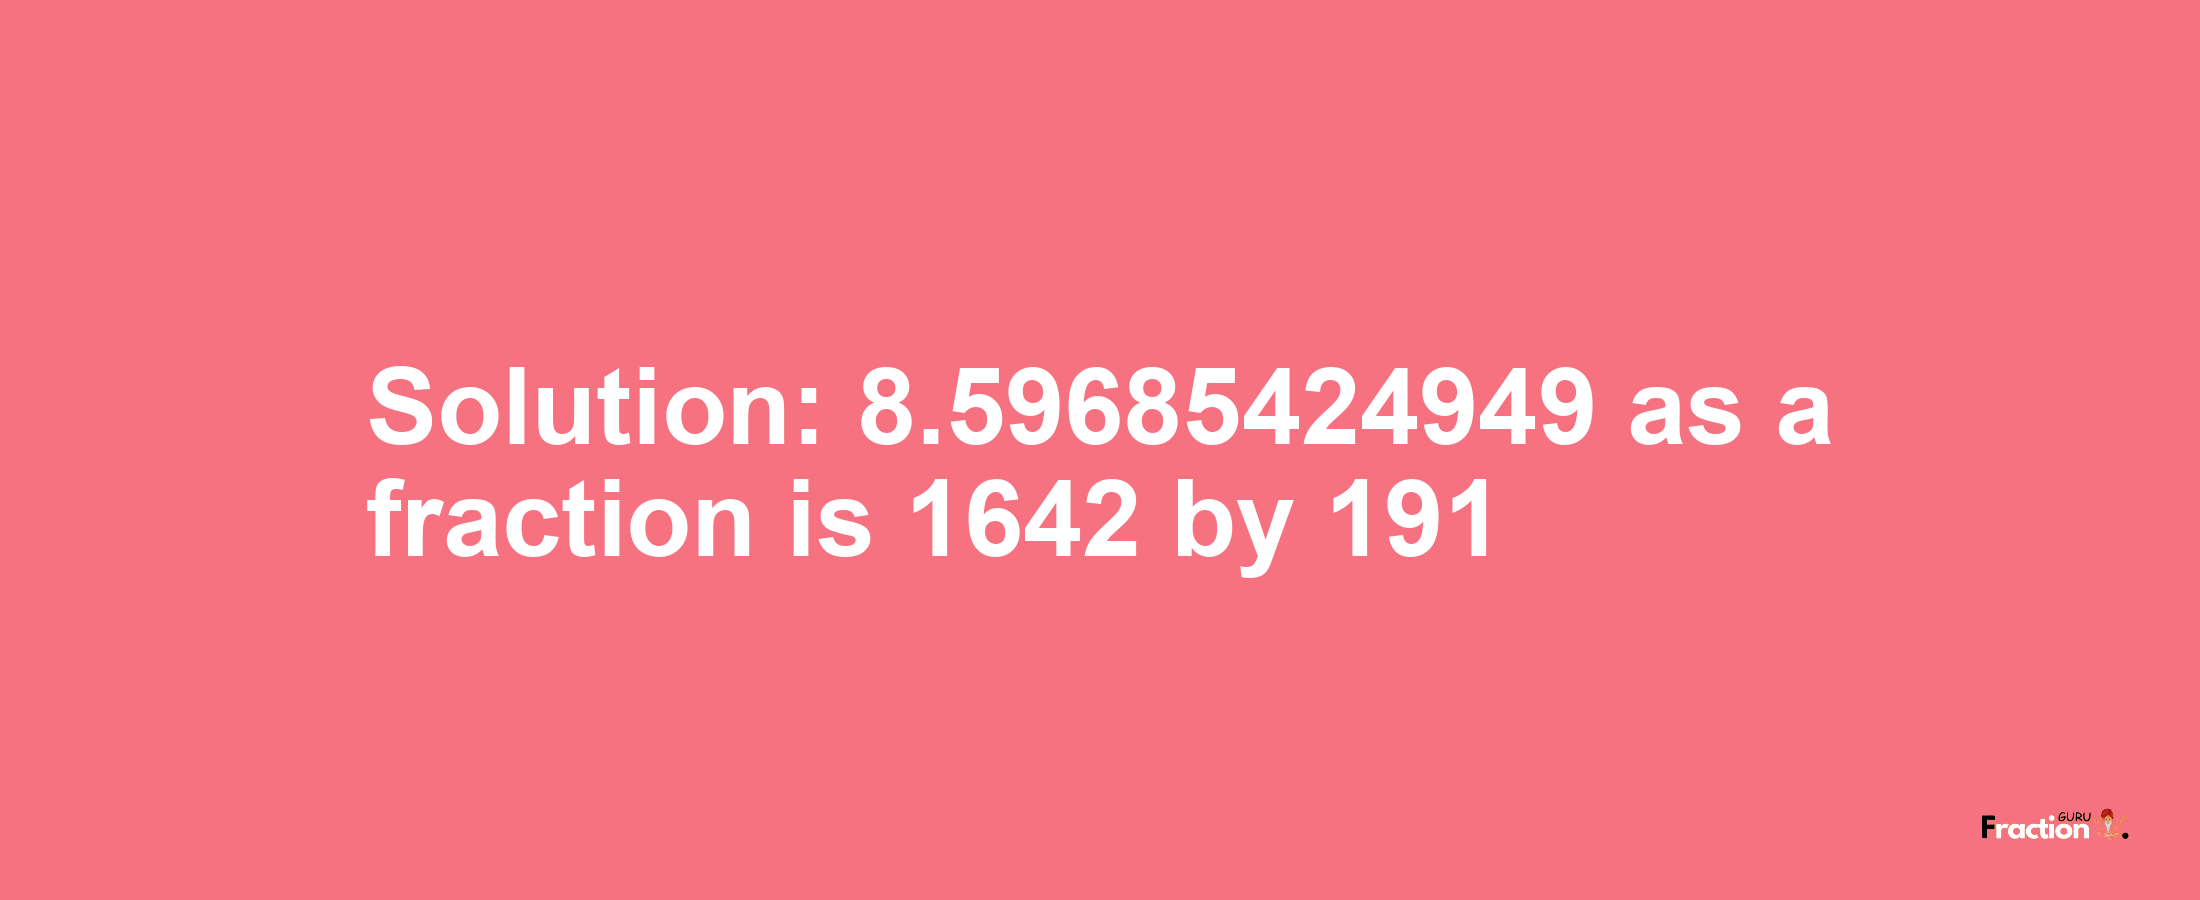 Solution:8.59685424949 as a fraction is 1642/191